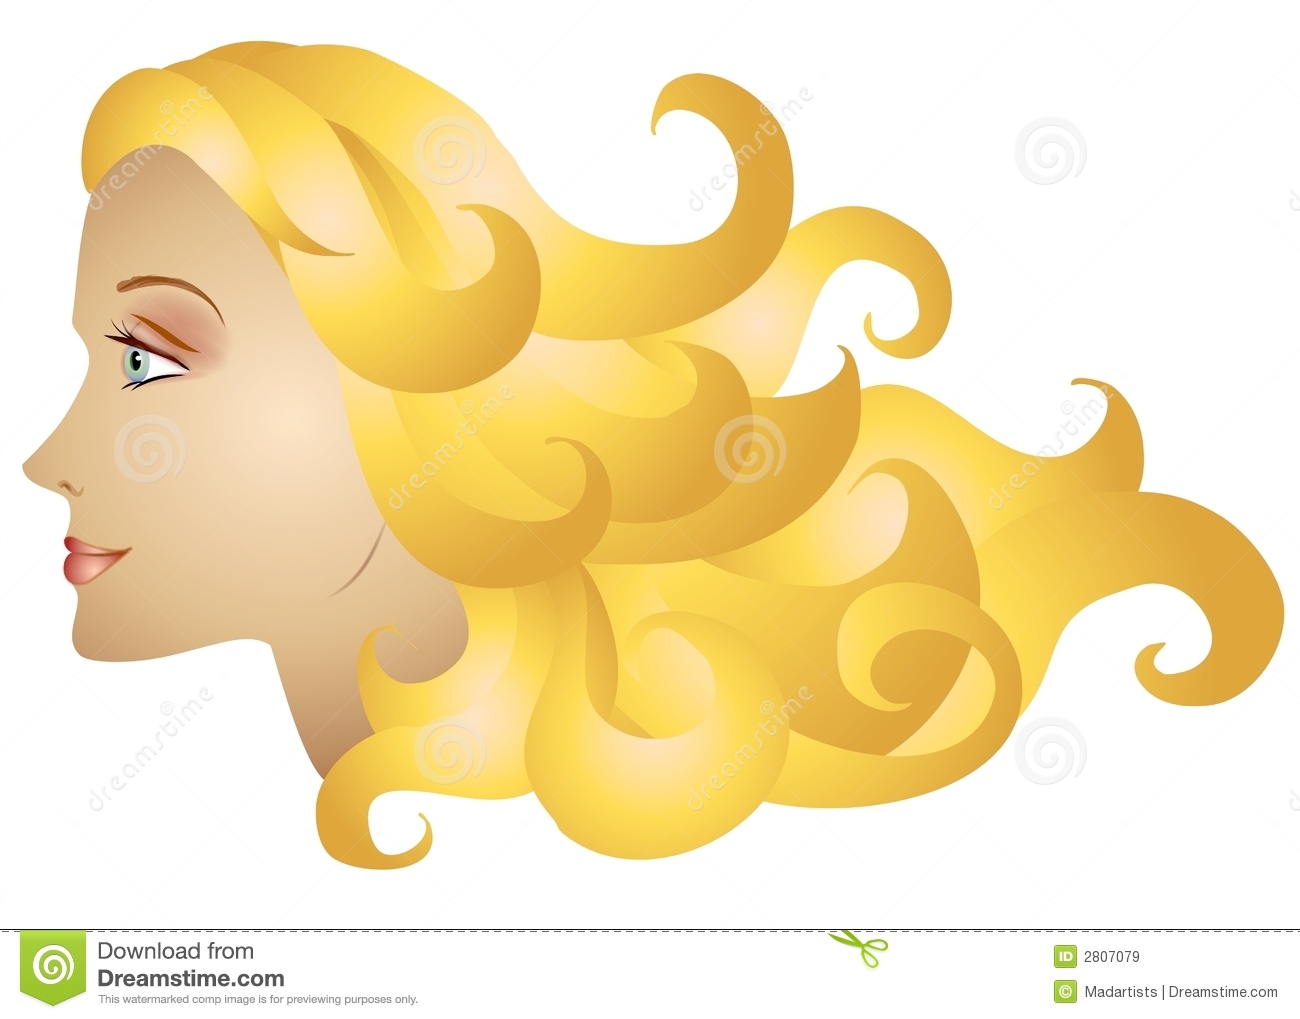 Clip Art Illustration Of A Woman   A Female Model Profile With Long